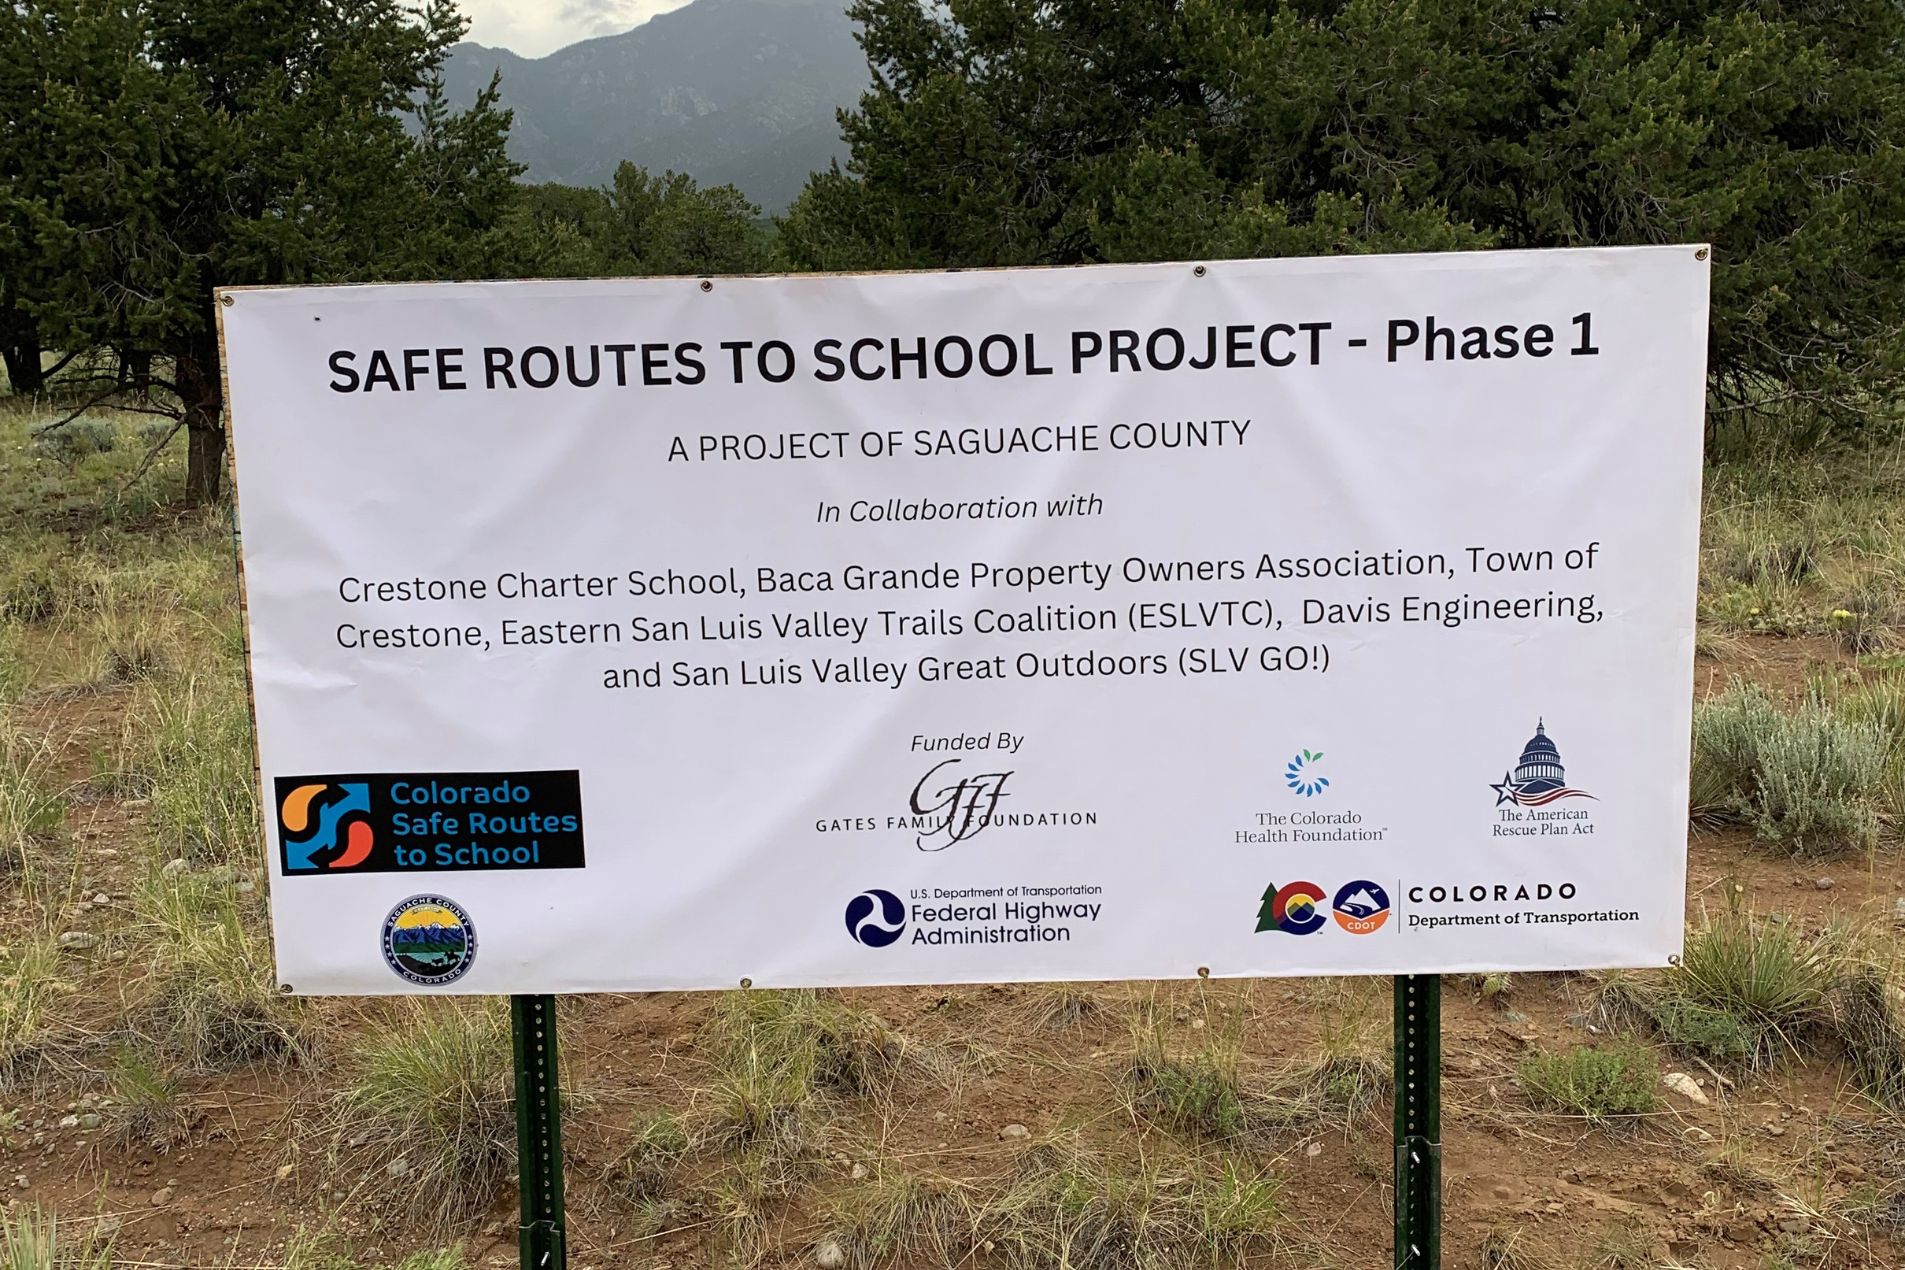 The sign is white with black and green text, and it’s mounted on two metal posts. The backdrop features a natural setting with trees and overcast skies. The sign lists the project collaborators, which include Crestone Charter School, Baca Grande Property Owners Association, Town of Crestone, Eastern San Luis Valley Trails Coalition (ESLVTC), Saguache County Government, and San Luis Valley Great Outdoors (SLV GO!). Each collaborator’s name is accompanied by a logo. 